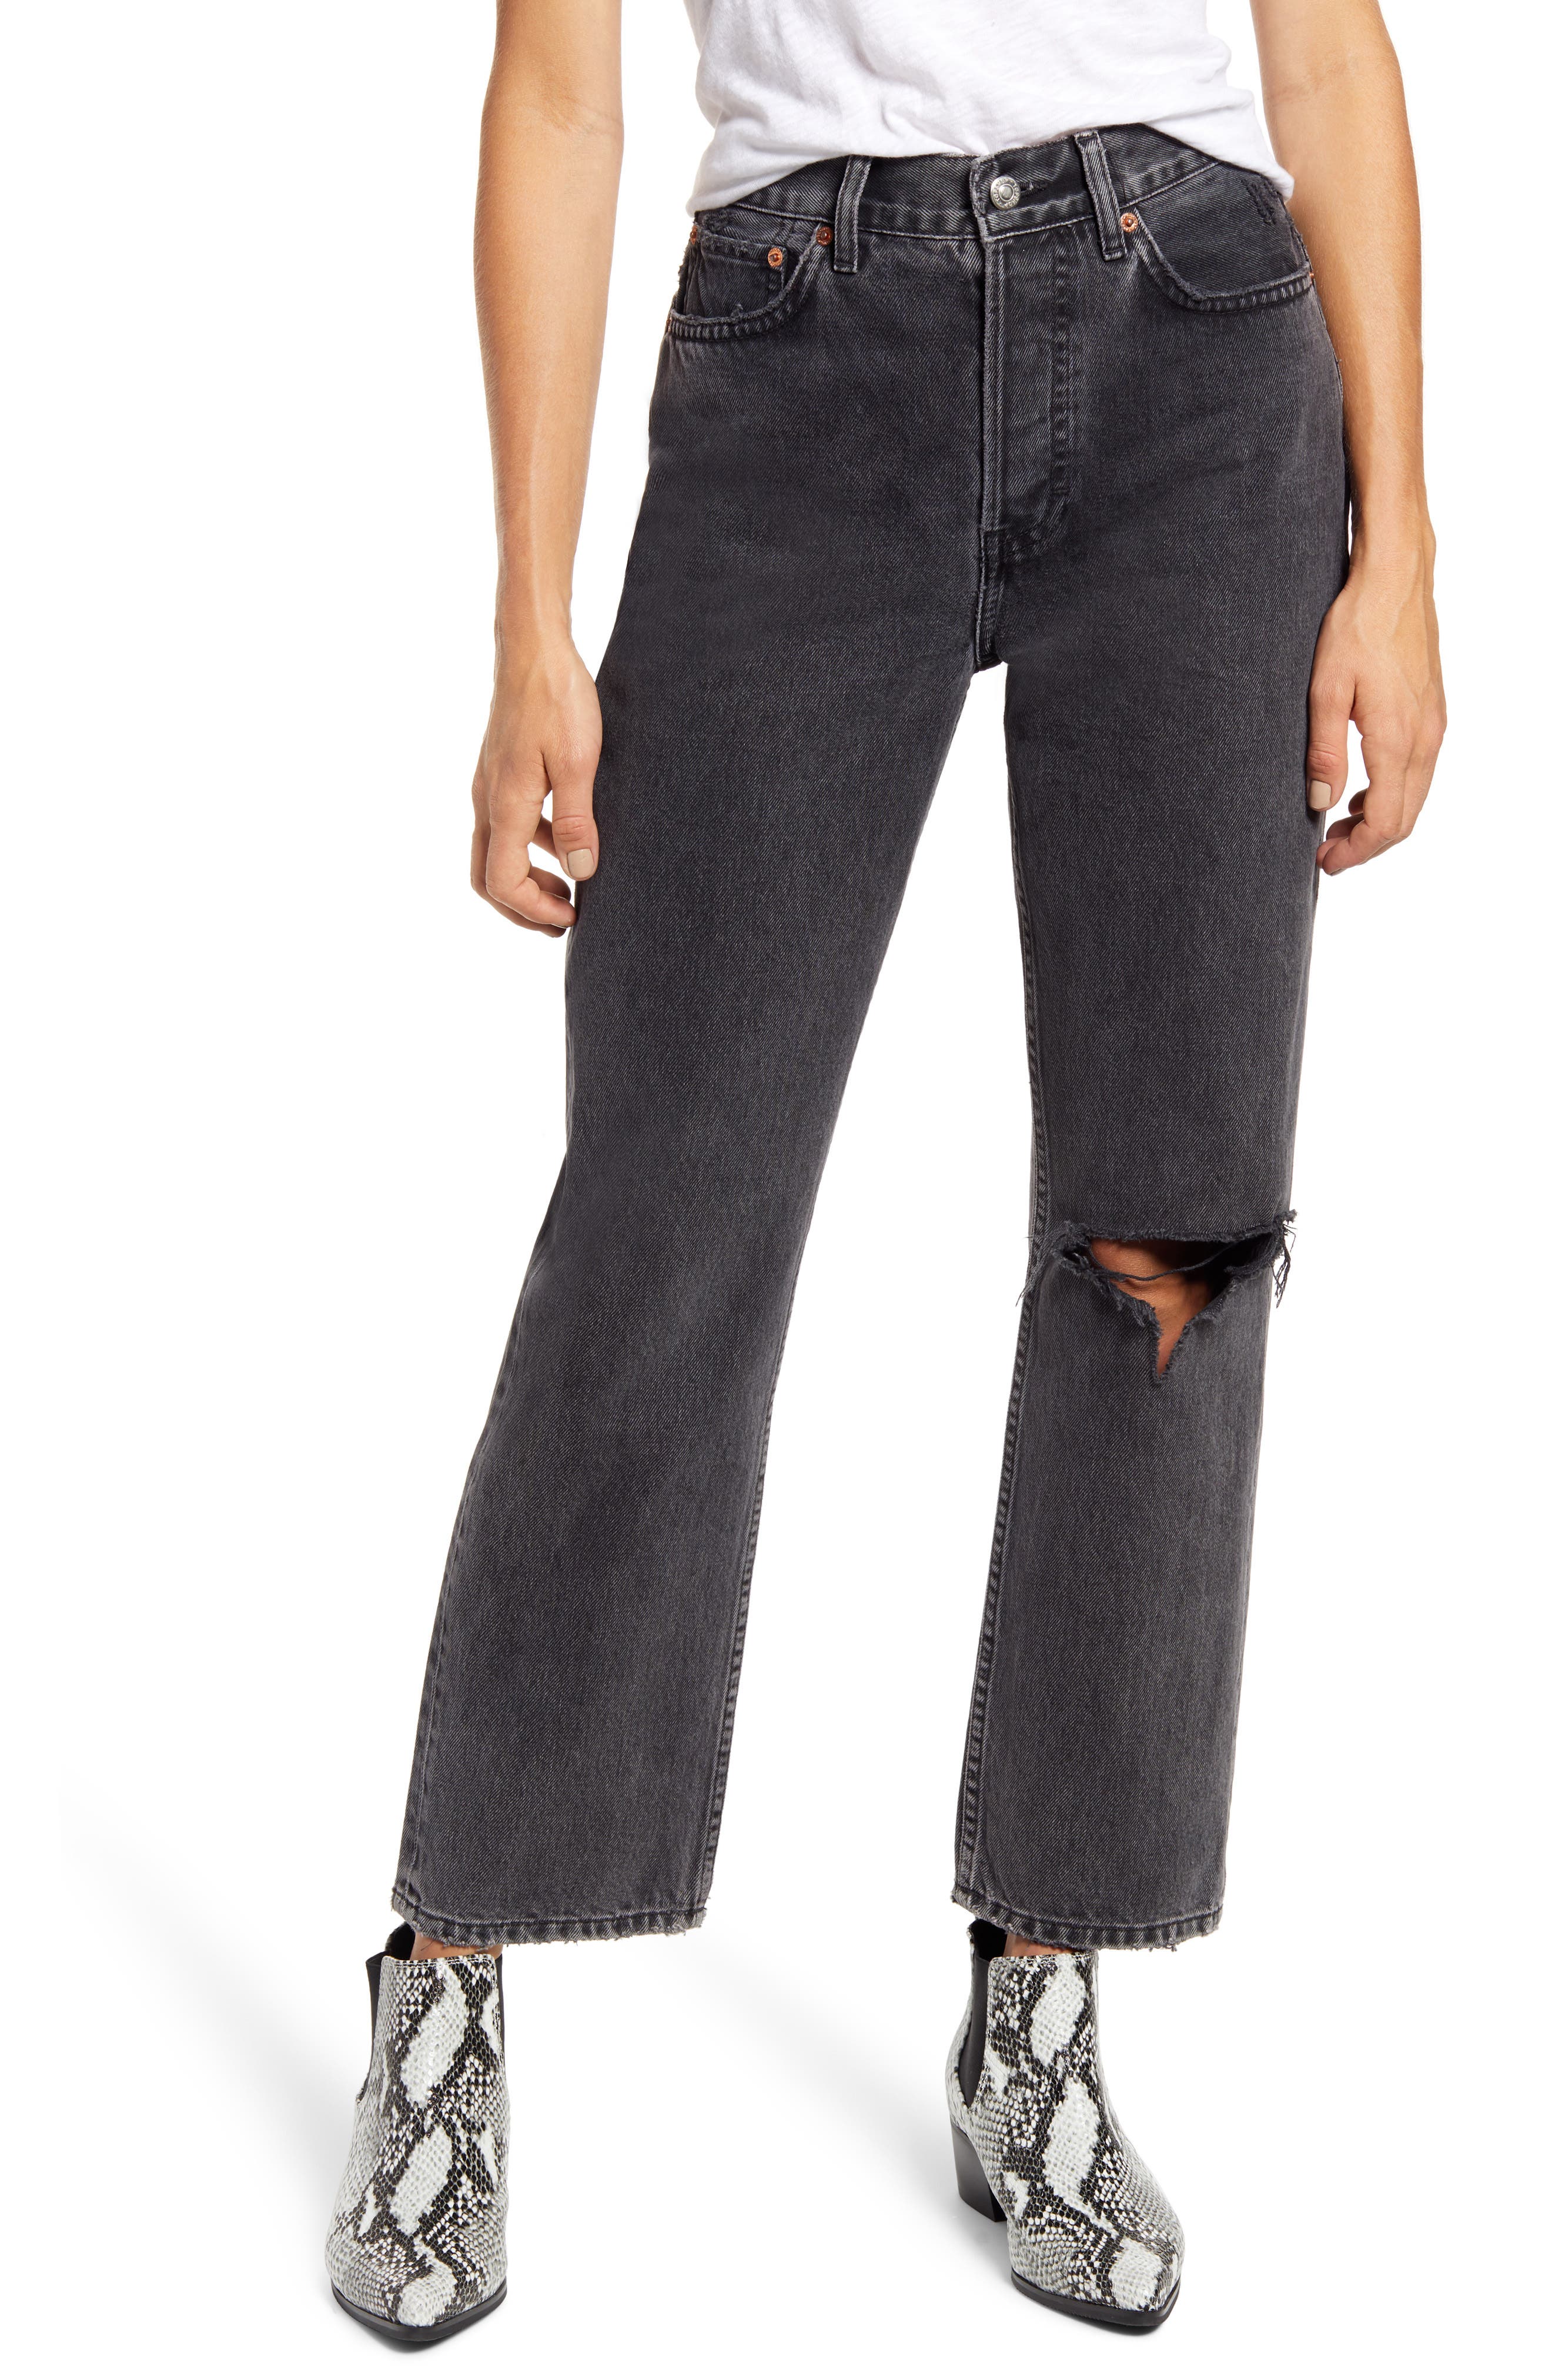 topshop ripped high waist dad jeans